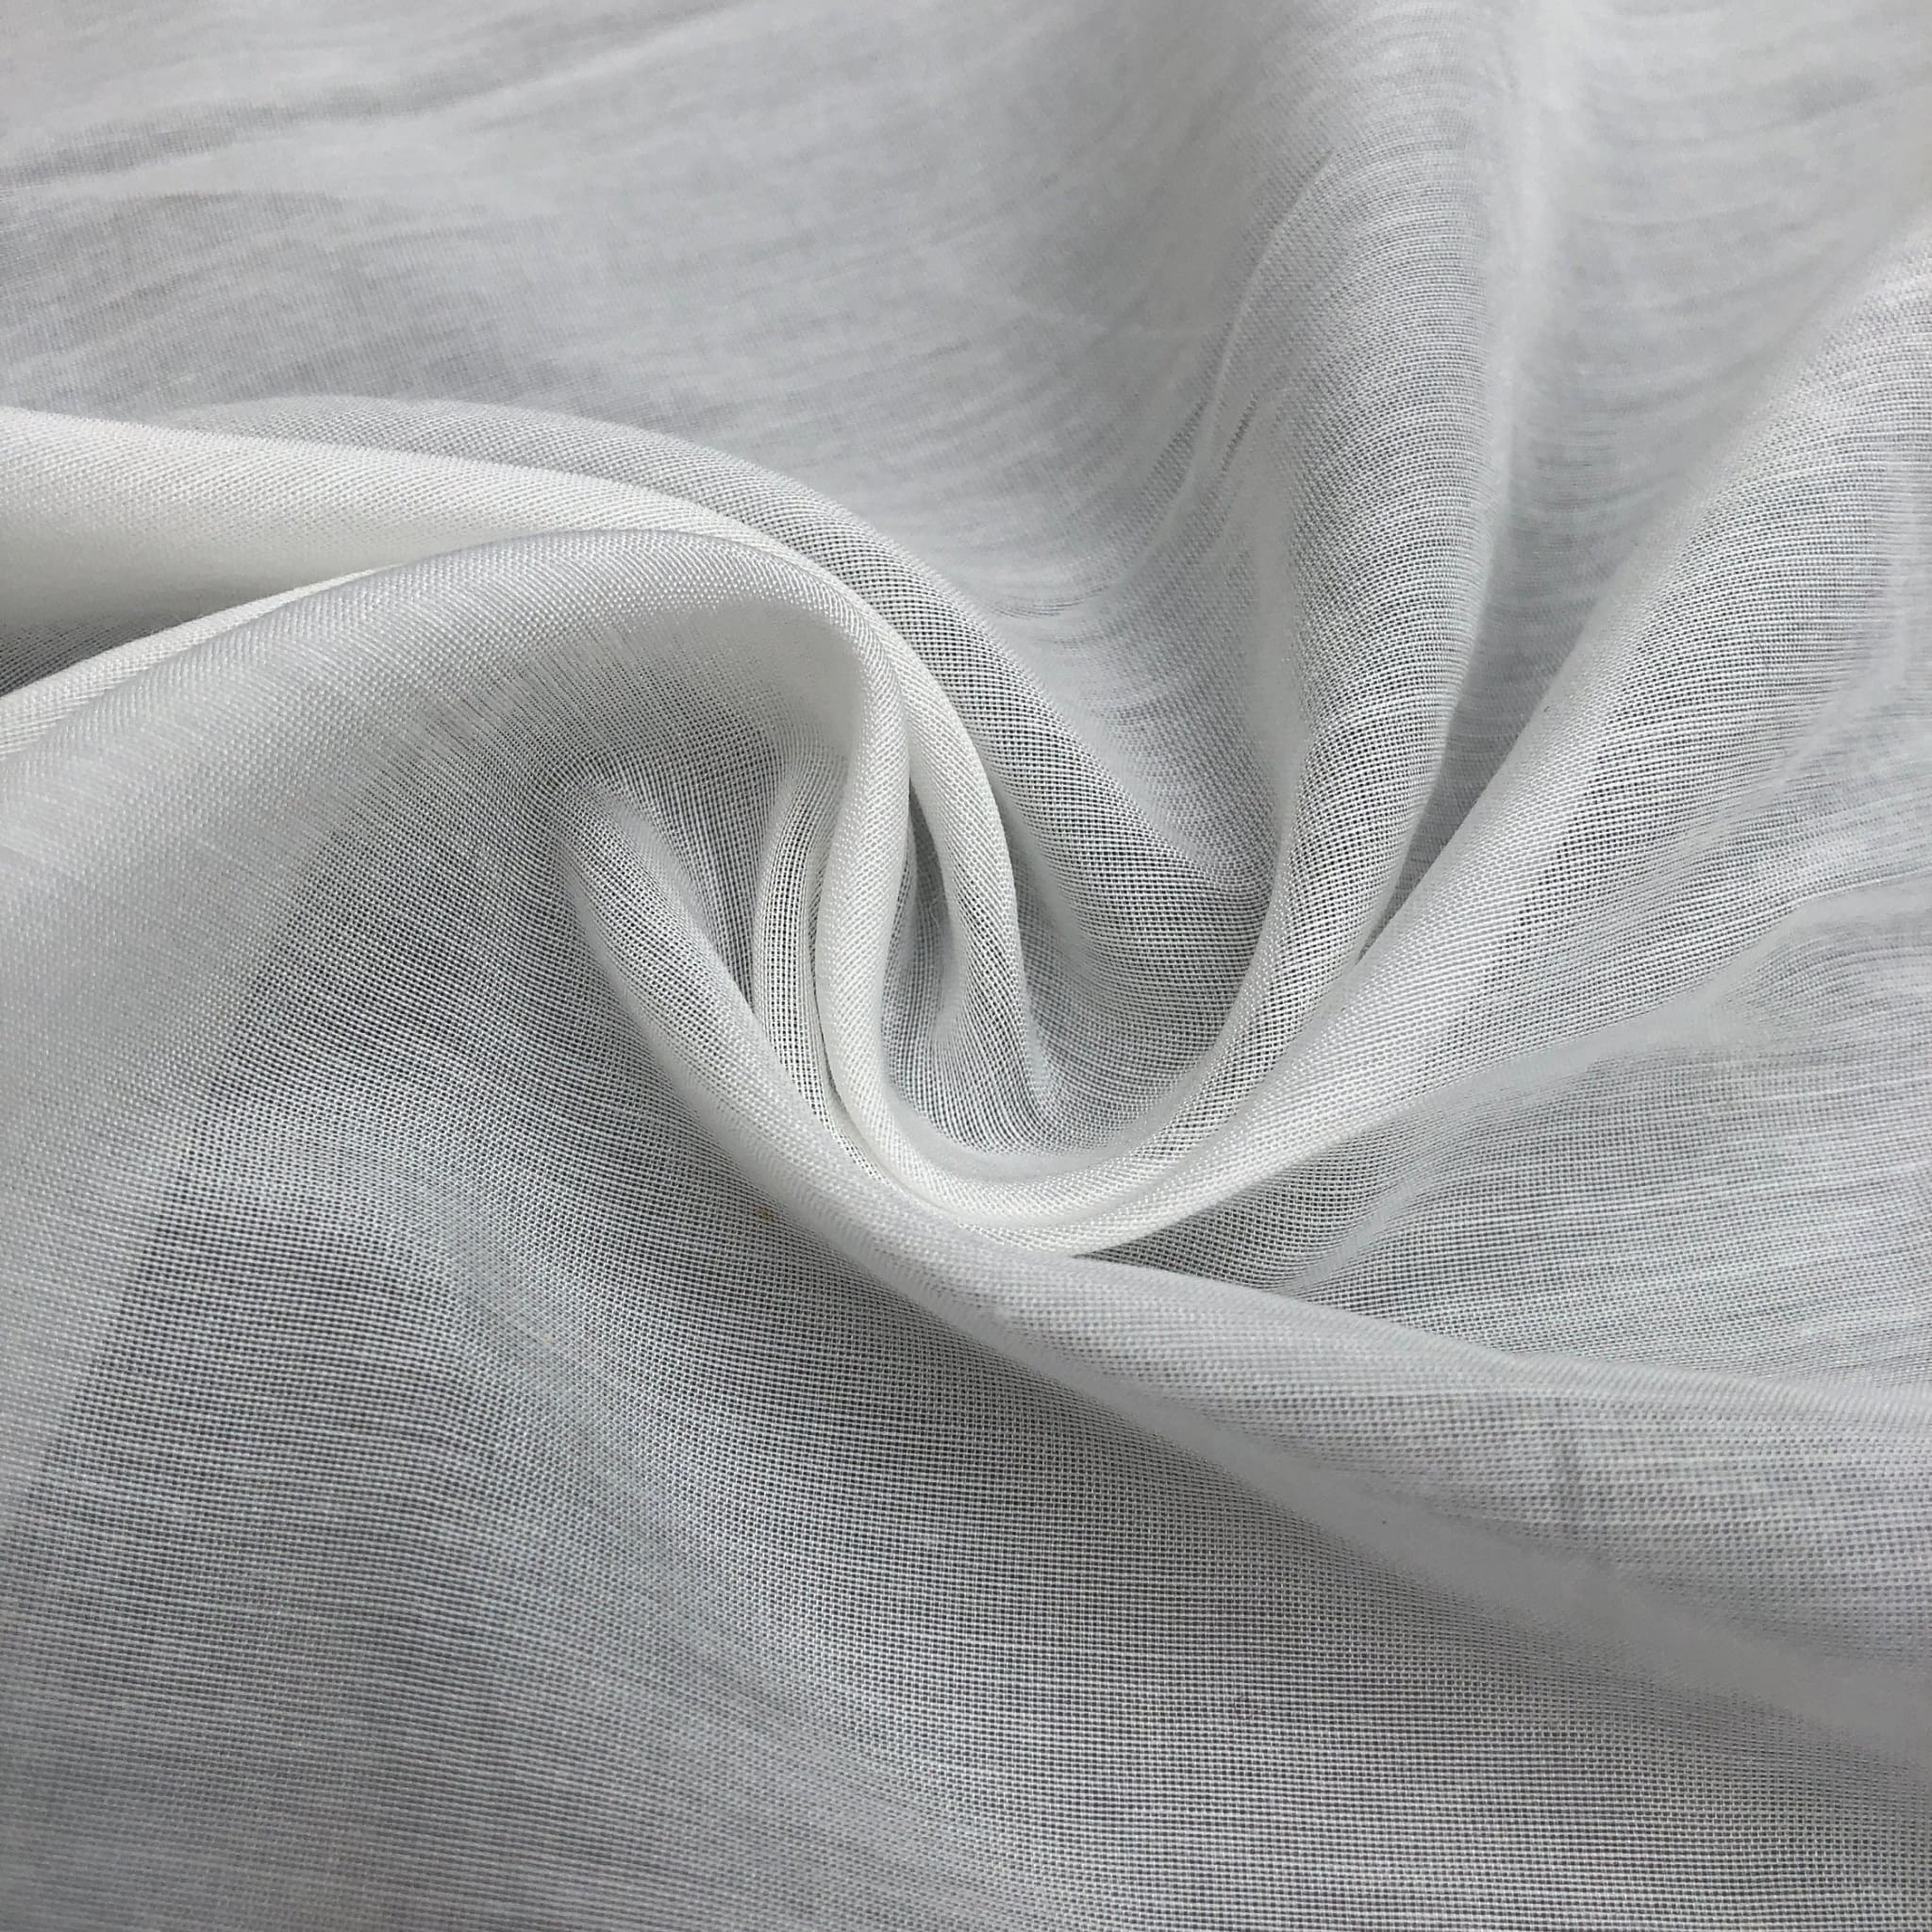 58 White 100% Supima Cotton Voile Sheer & Light Woven Fabric By